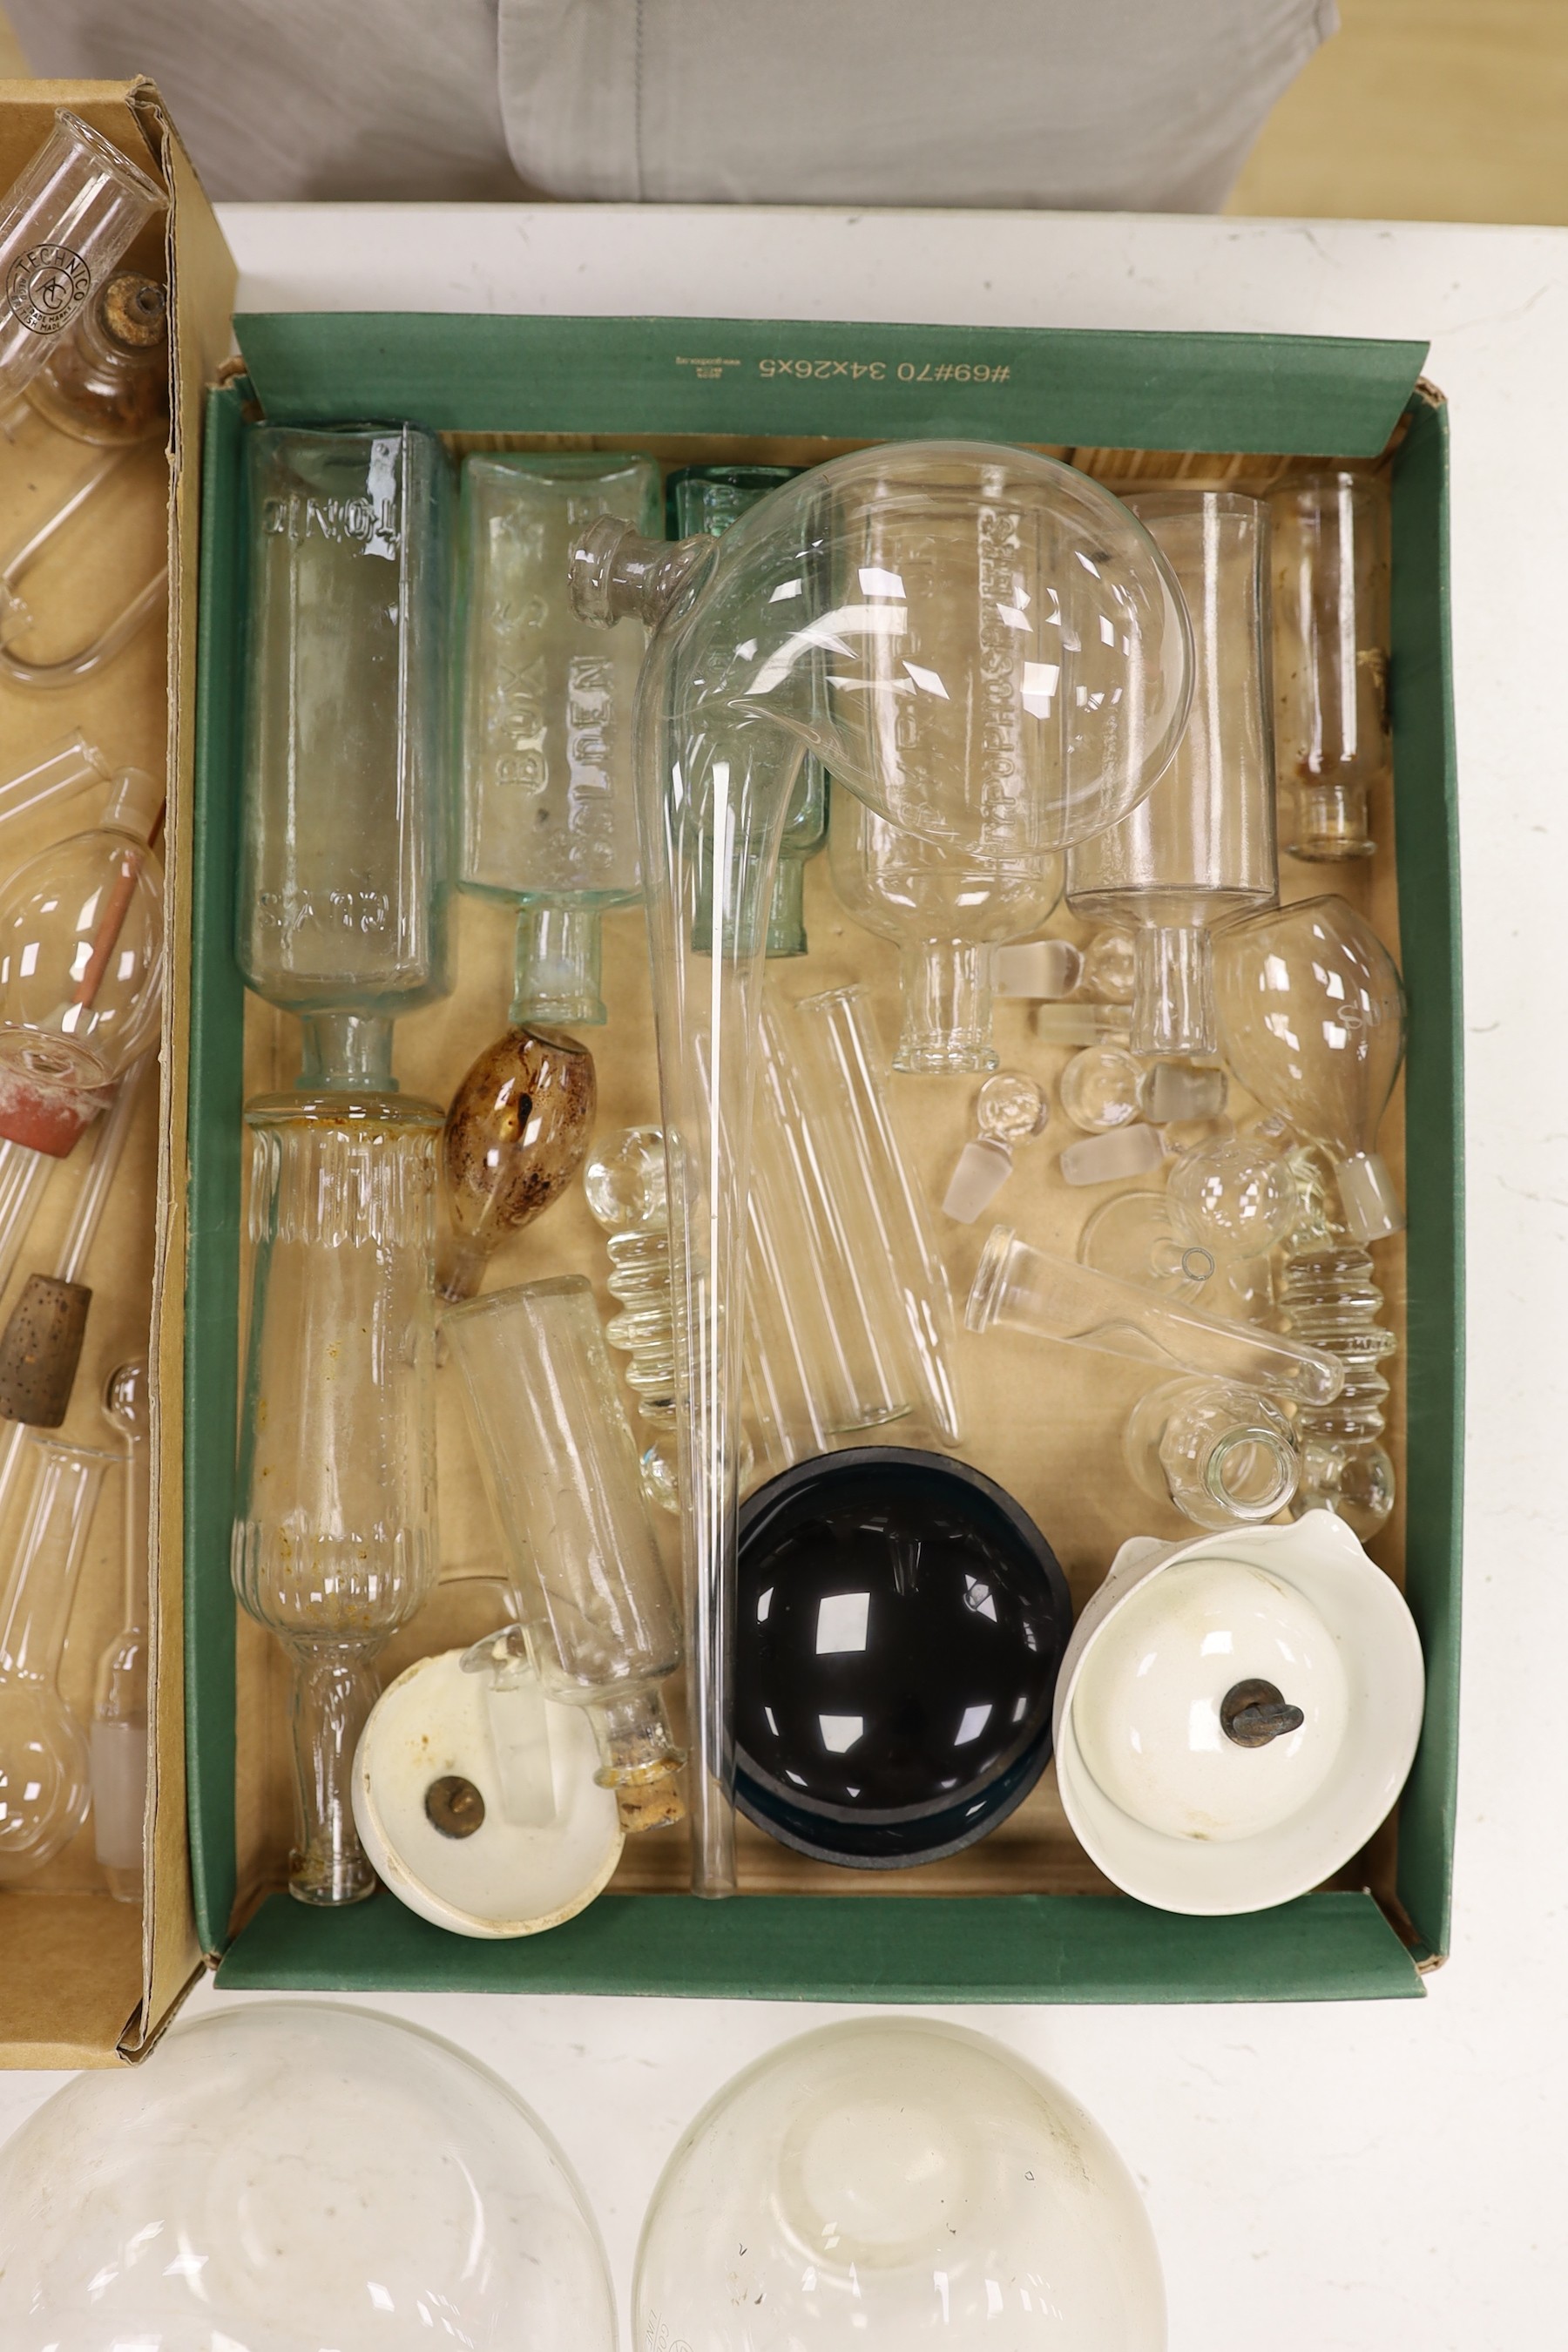 A pre-war chemistry set including stirring sticks, pipettes, tubes and bottles